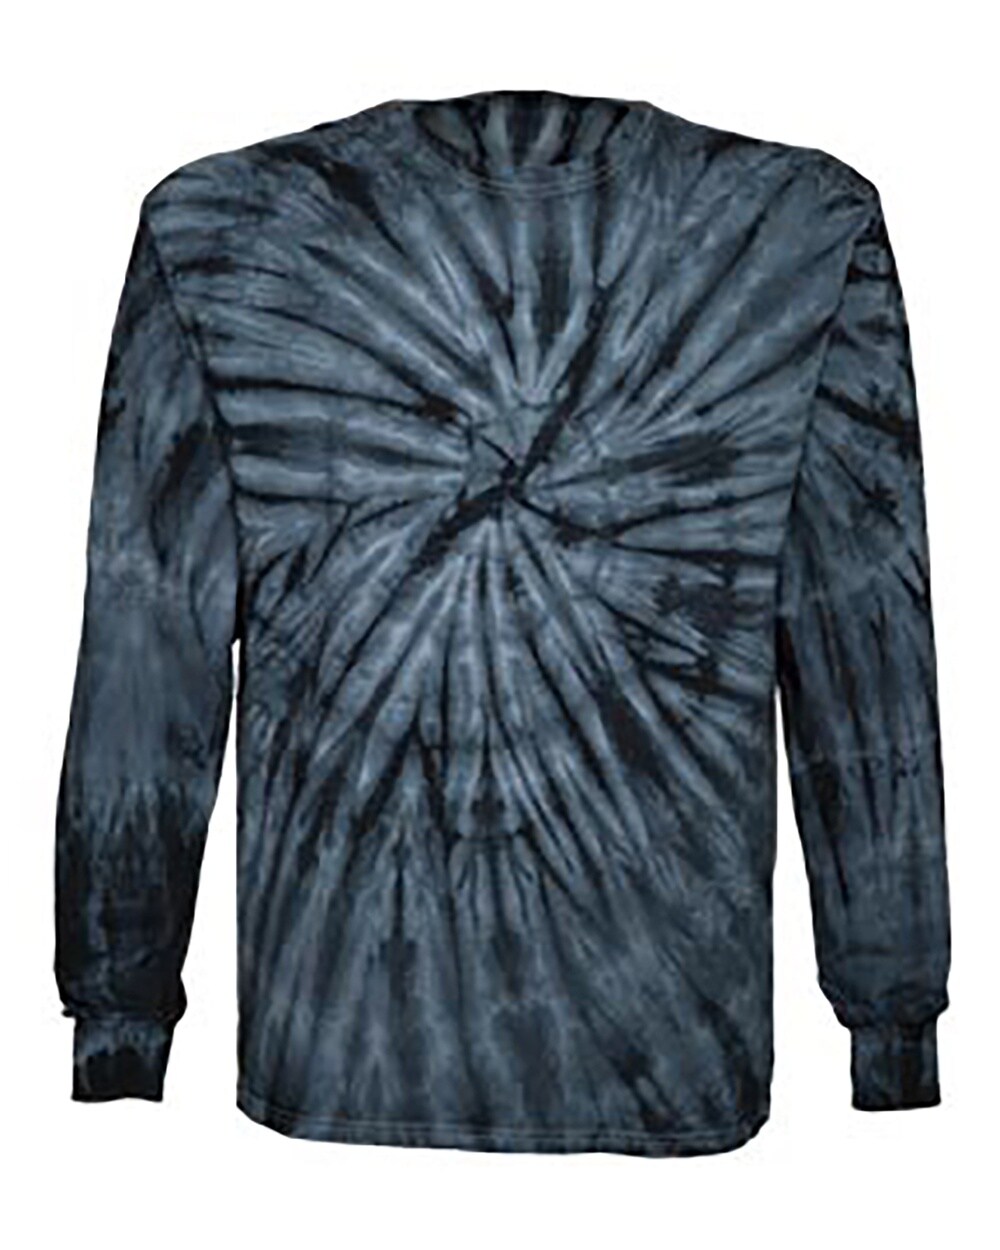 DYENOMITE® Youth Cyclone Tie-Dyed Long Sleeve T-Shirt